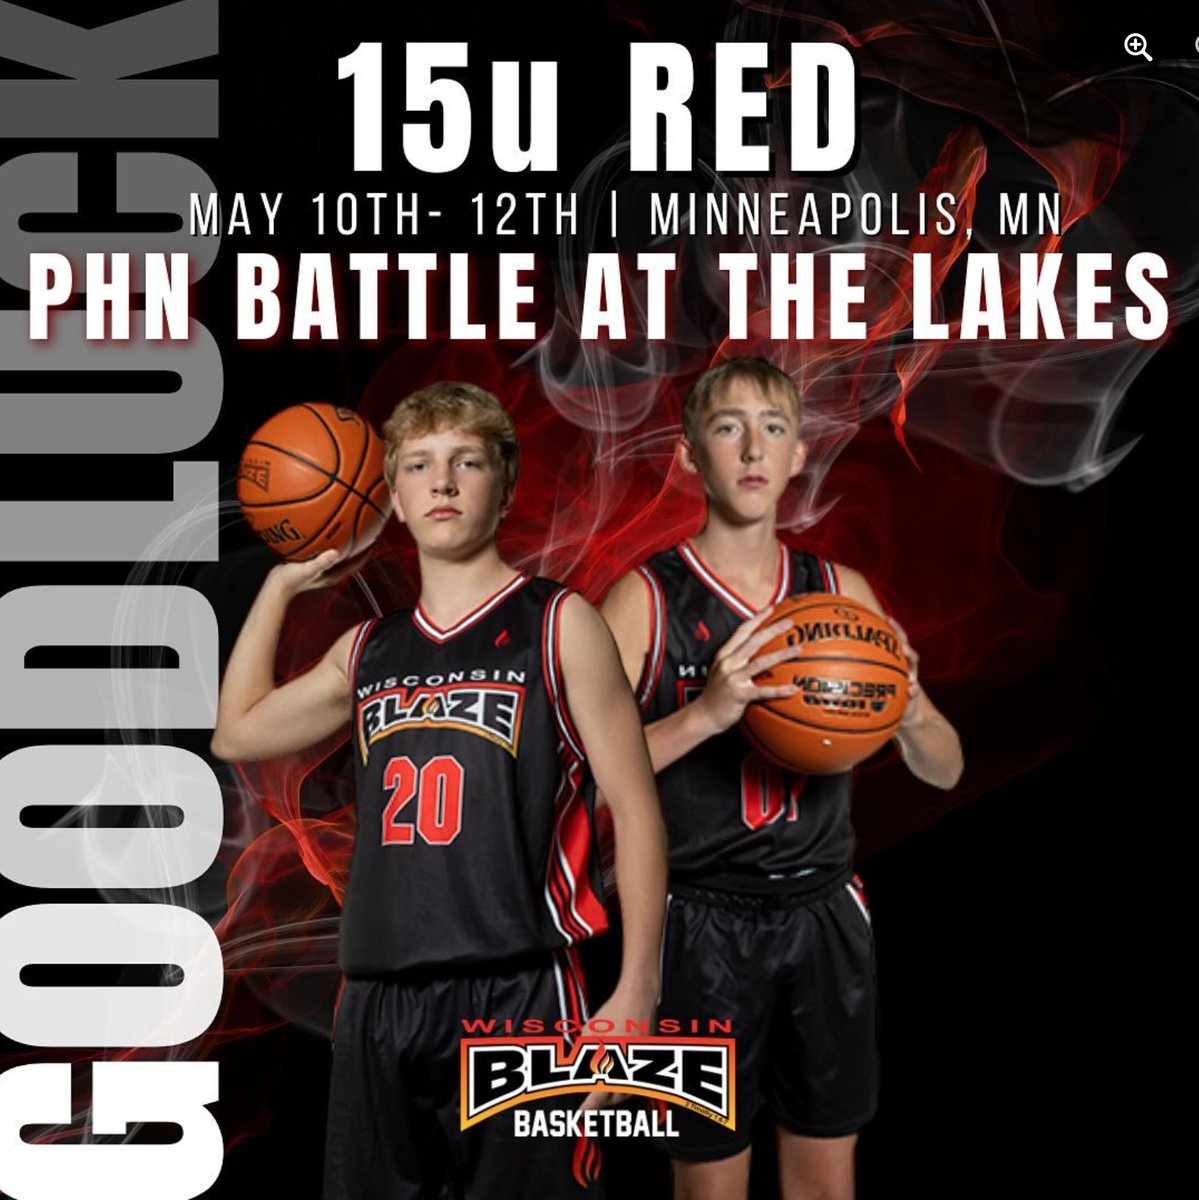 Good luck to our 15U-17U WI Blaze Boys teams competing in the PHN Battle at the Lakes and Great Lakes Takeover tourneys this weekend! 🏀 
#WisconsinBlaze #Betheflame🔥